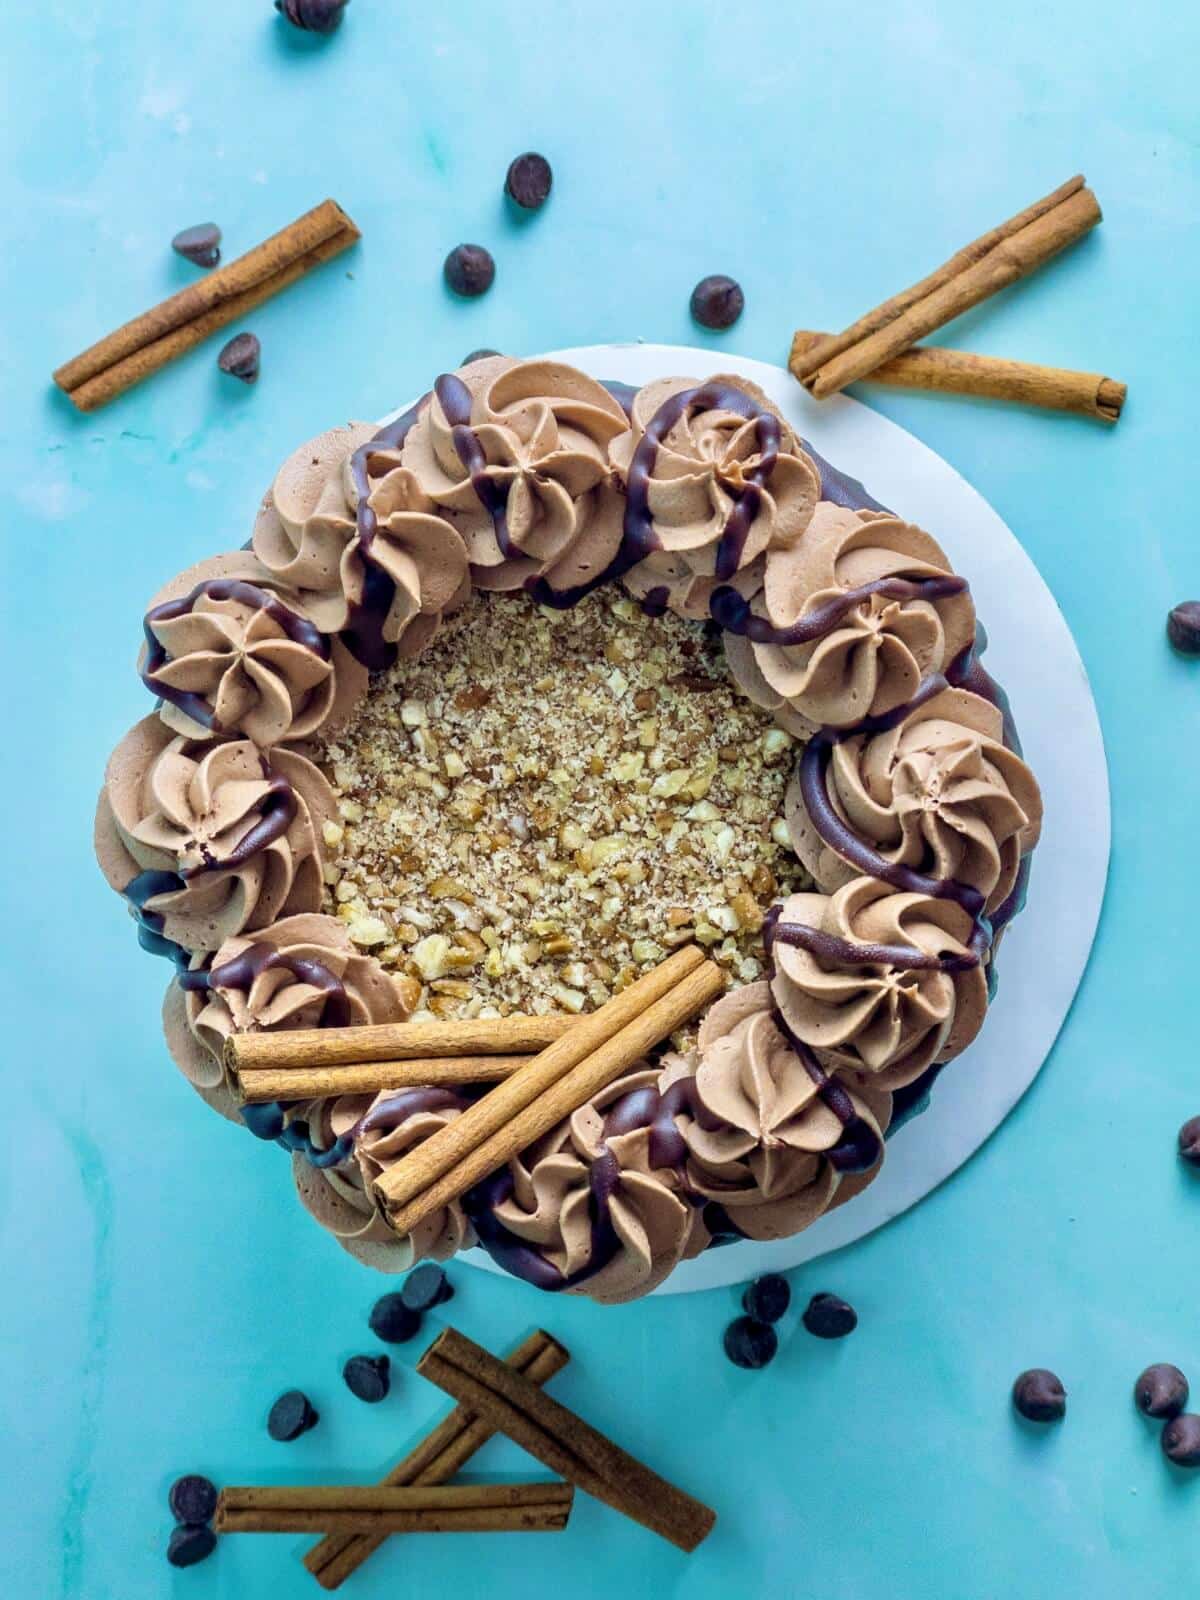 an overhead shot of chocolate cinnamon cake with pecans on top of the cake and cinnamon sticks